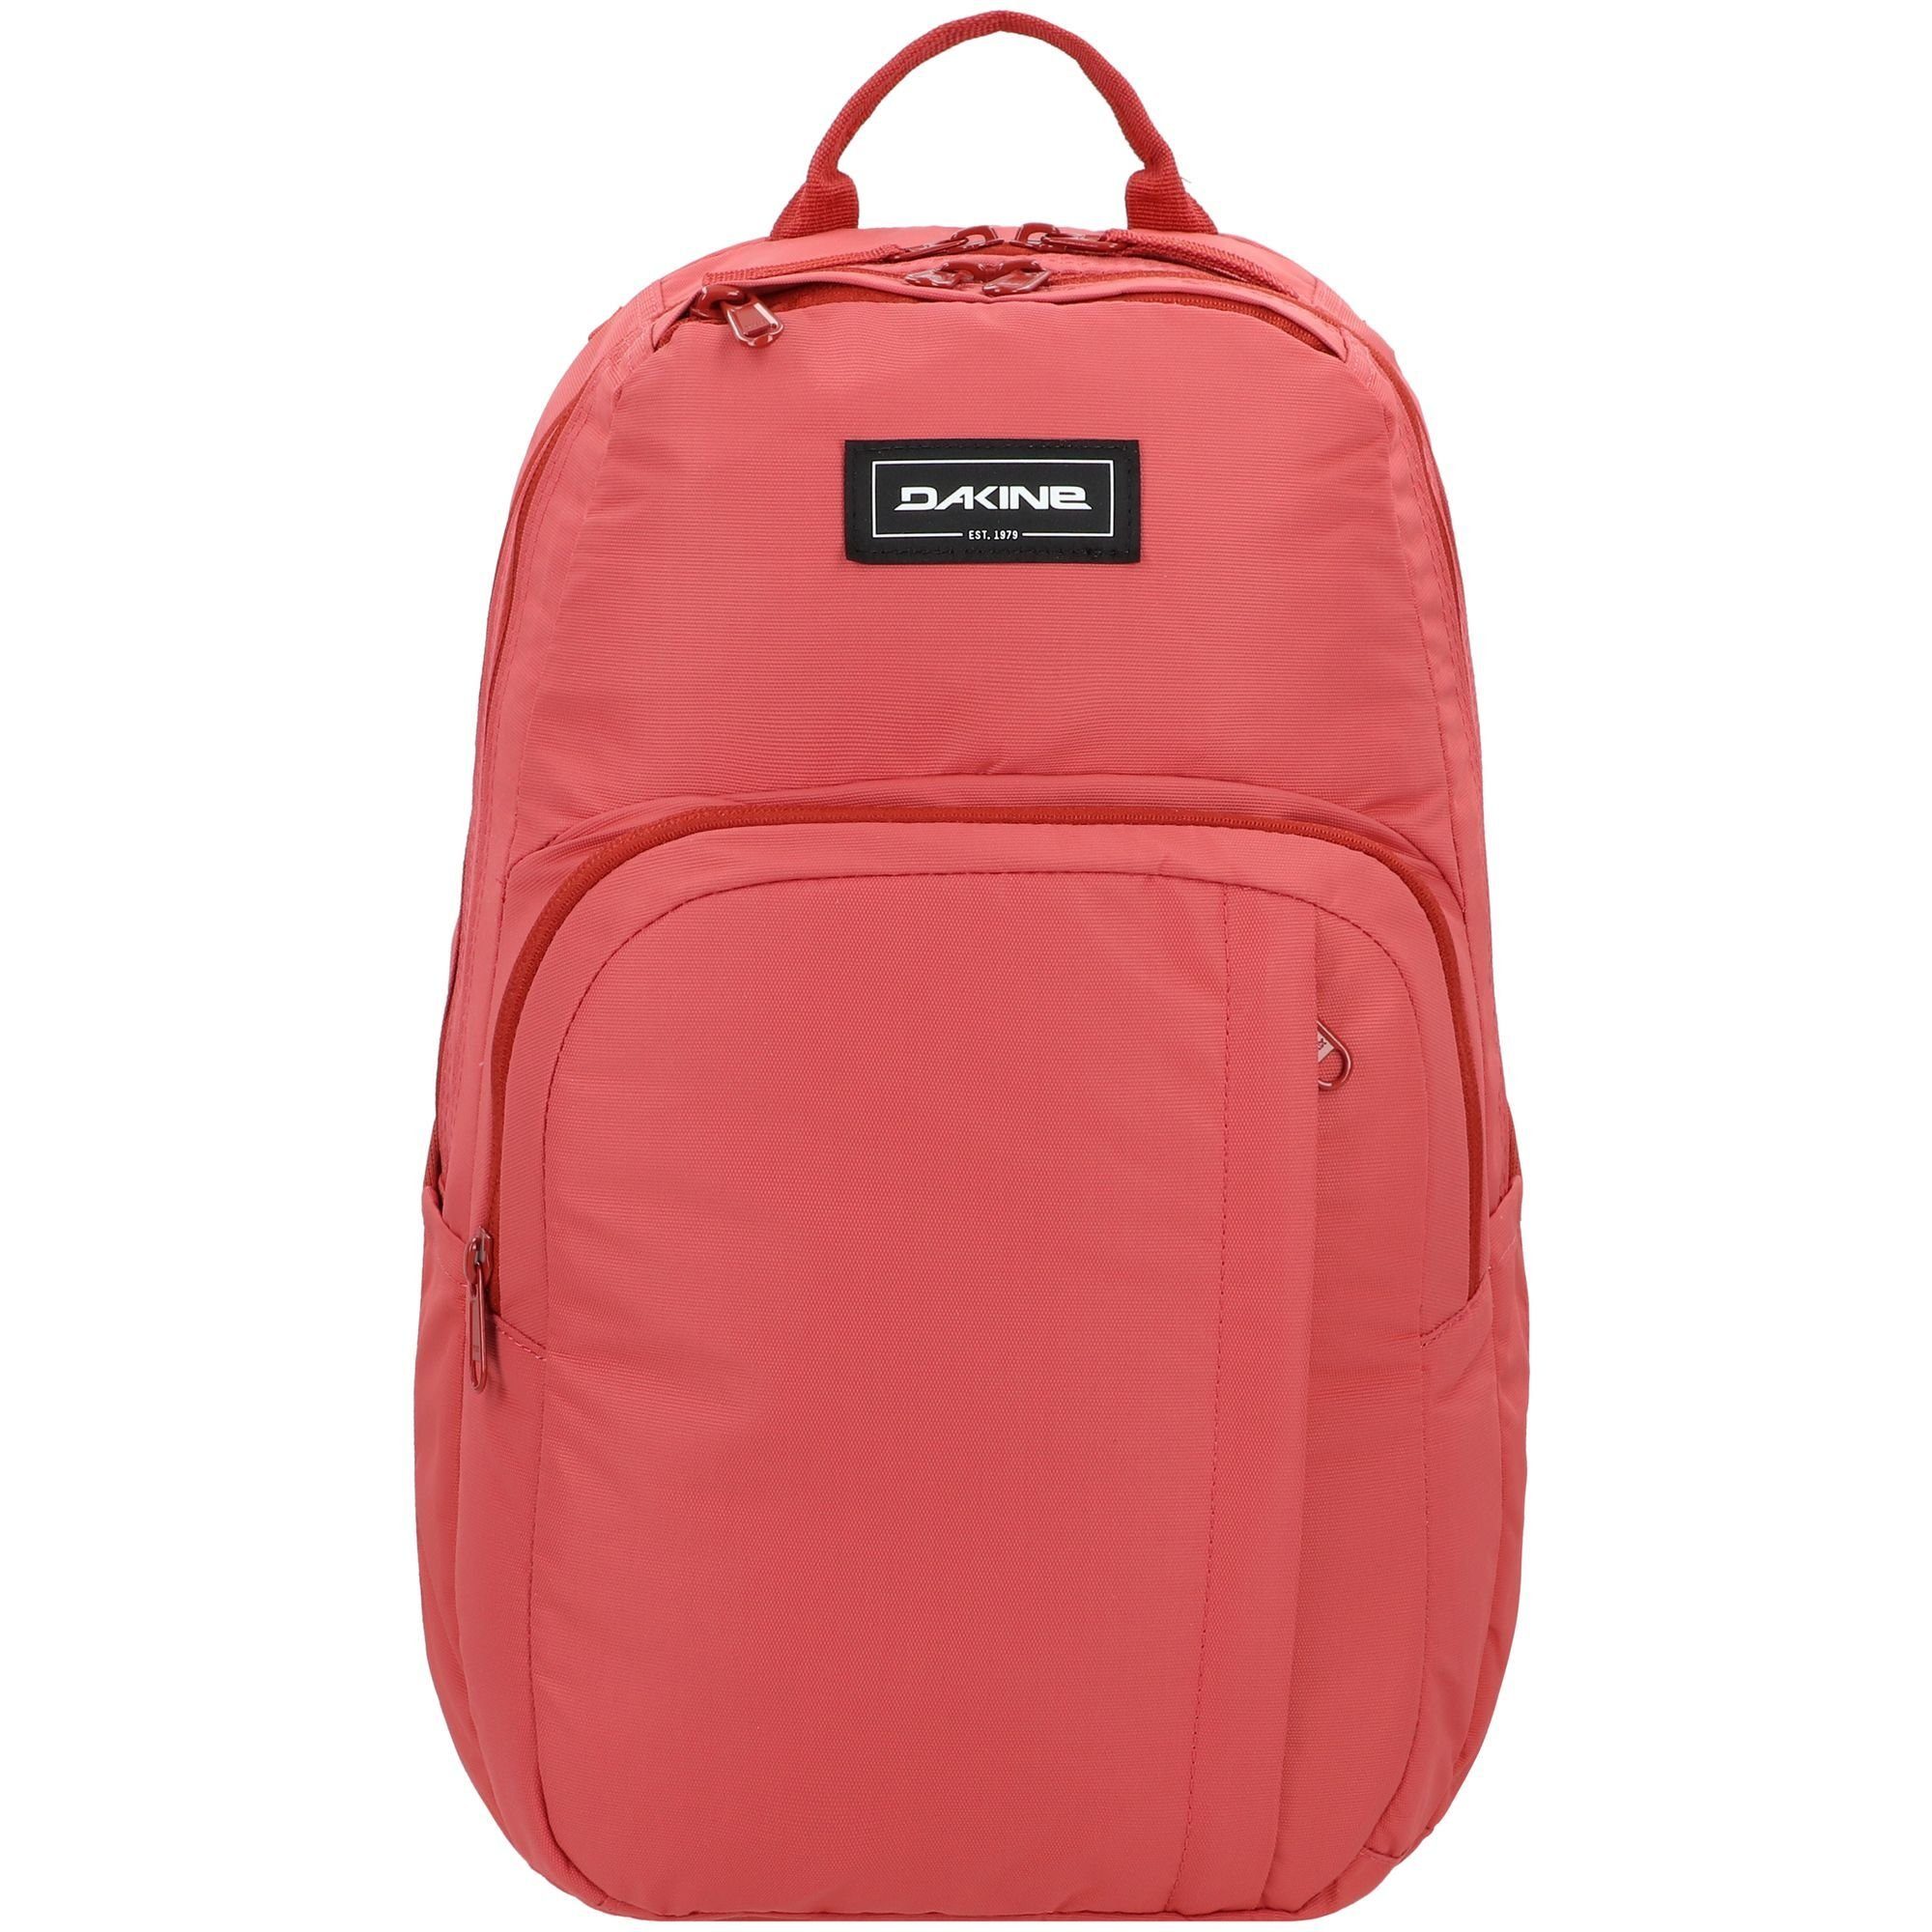 Polyester CAMPUS, red Daypack Dakine mineral